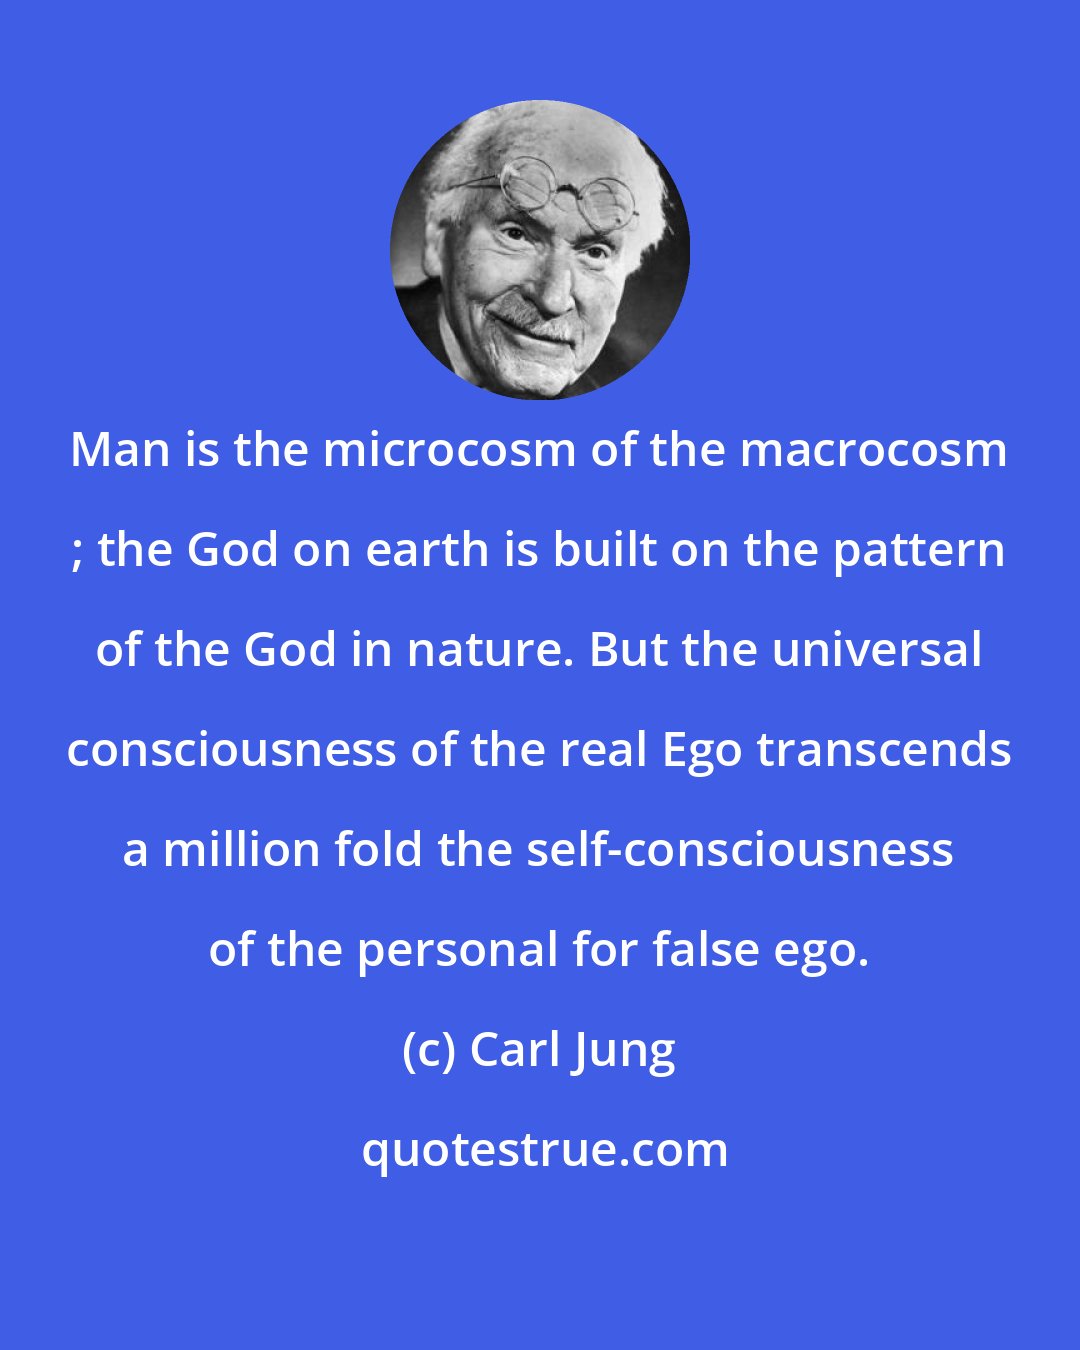 Carl Jung: Man is the microcosm of the macrocosm ; the God on earth is built on the pattern of the God in nature. But the universal consciousness of the real Ego transcends a million fold the self-consciousness of the personal for false ego.